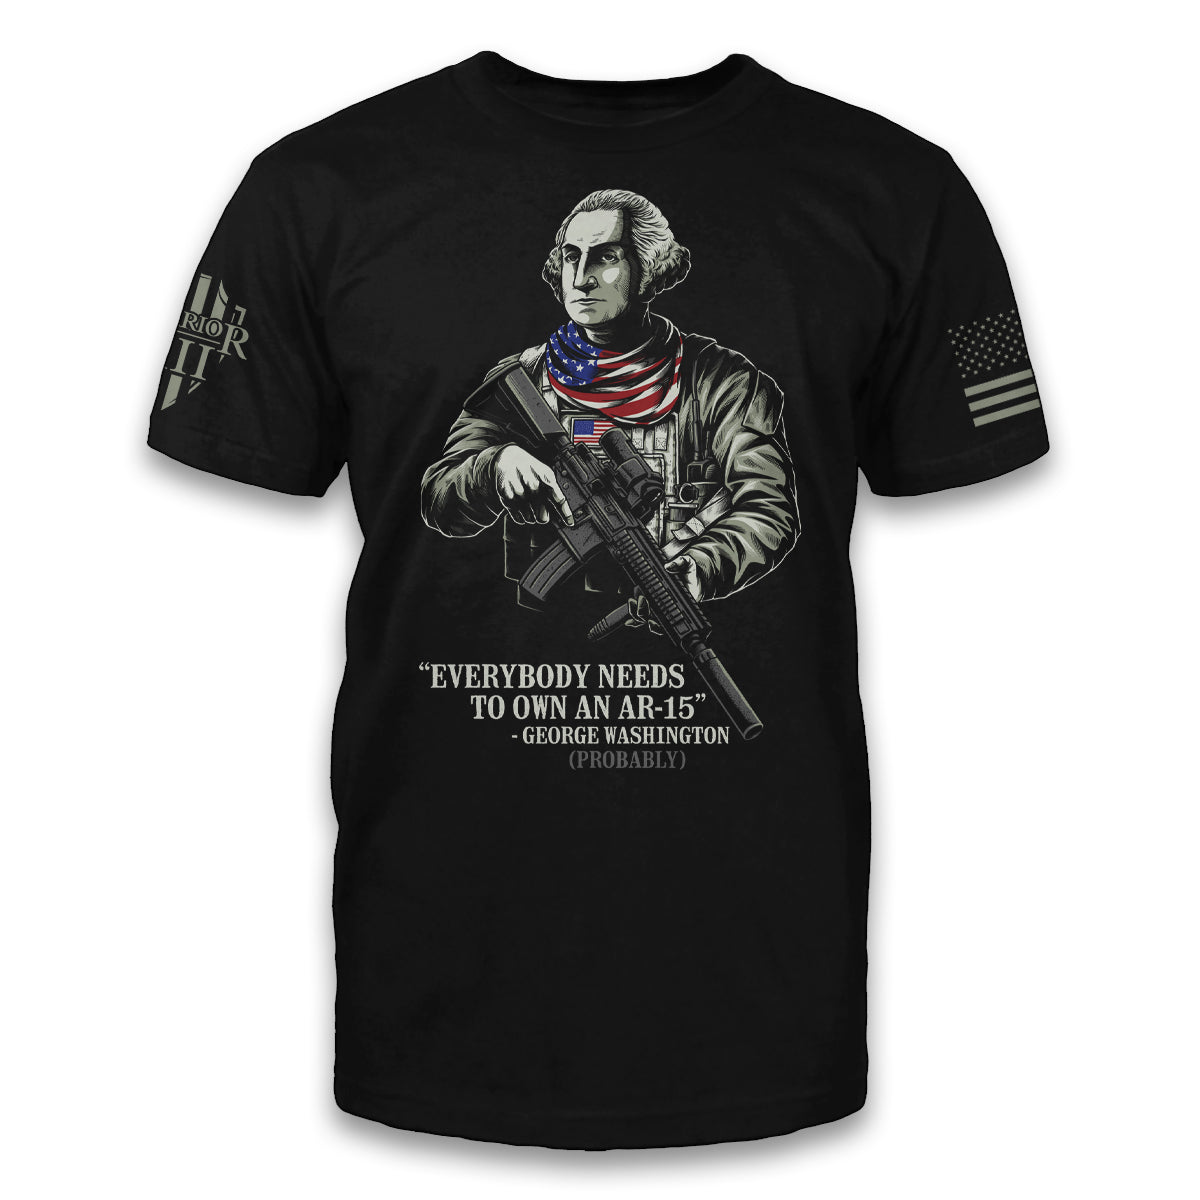 A black t-shirt with the words "Everybody needs to own an AR-15" -George Washington (probably)" and George Washington holding an AR-15 printed on the front.